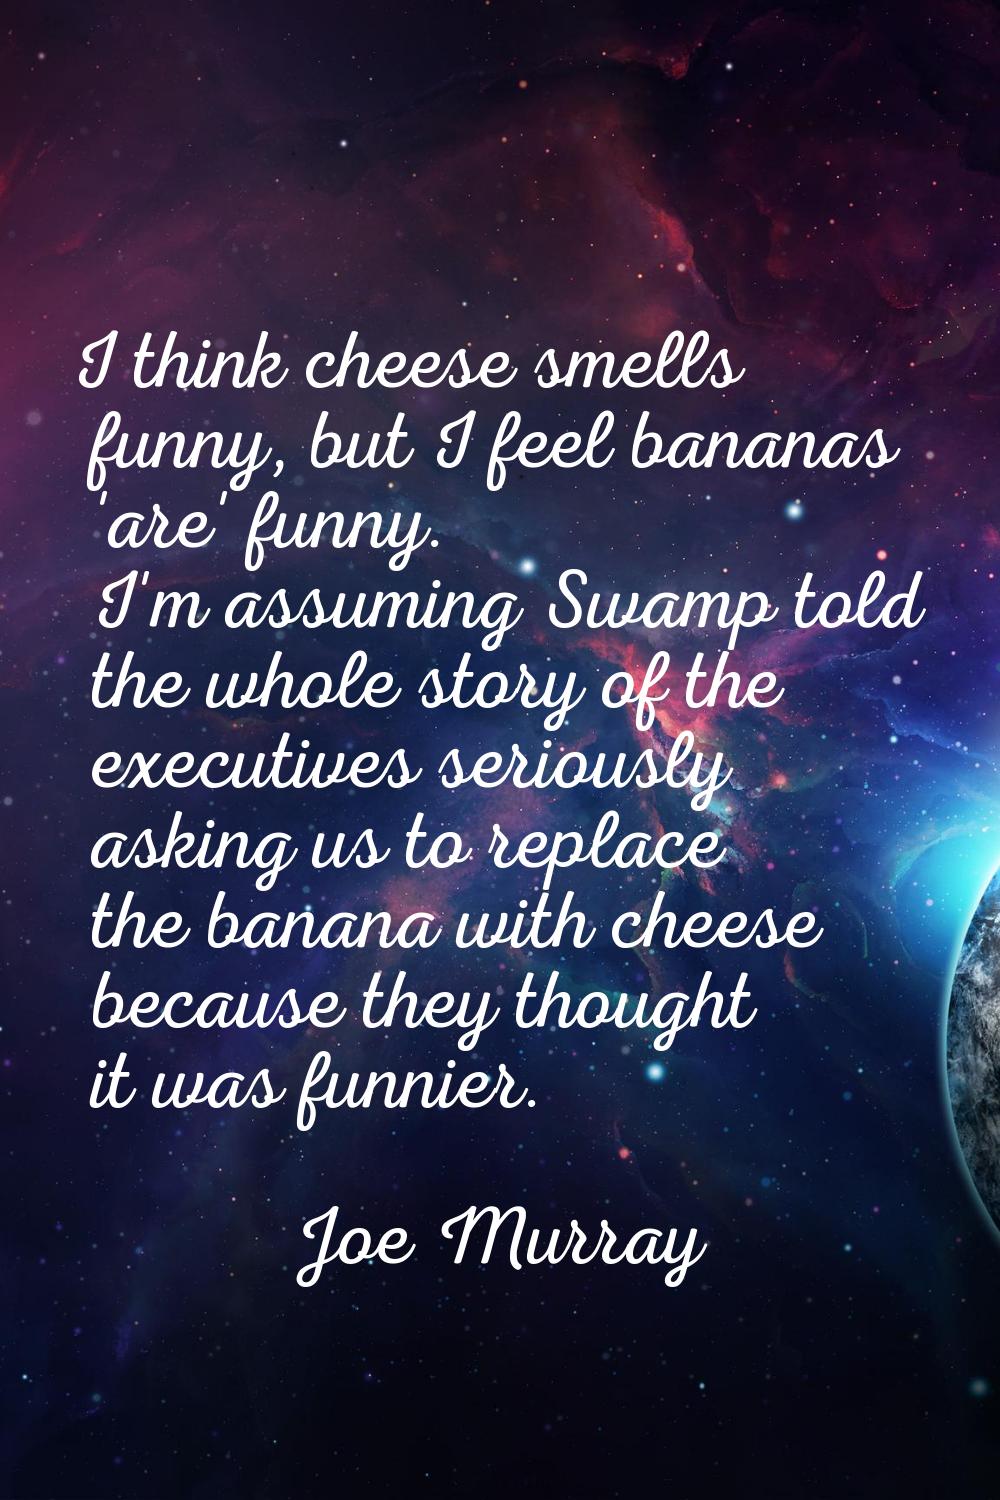 I think cheese smells funny, but I feel bananas 'are' funny. I'm assuming Swamp told the whole stor